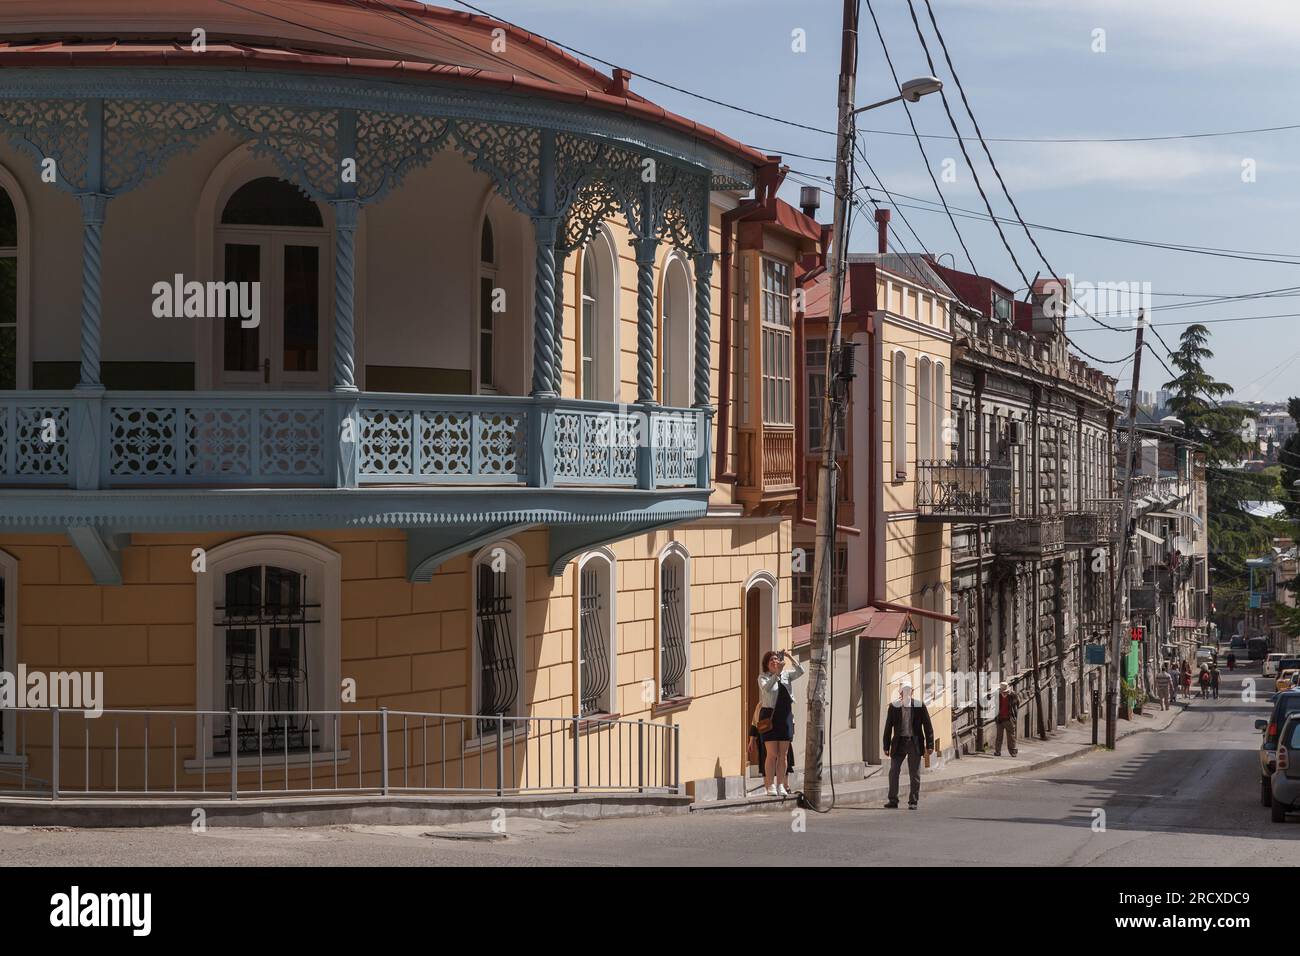 Tbilisi, Georgia - April 29, 2019: Old Tbilisi street view with traditional wooden balconies of olf residential houses, ordinary people walk the stree Stock Photo